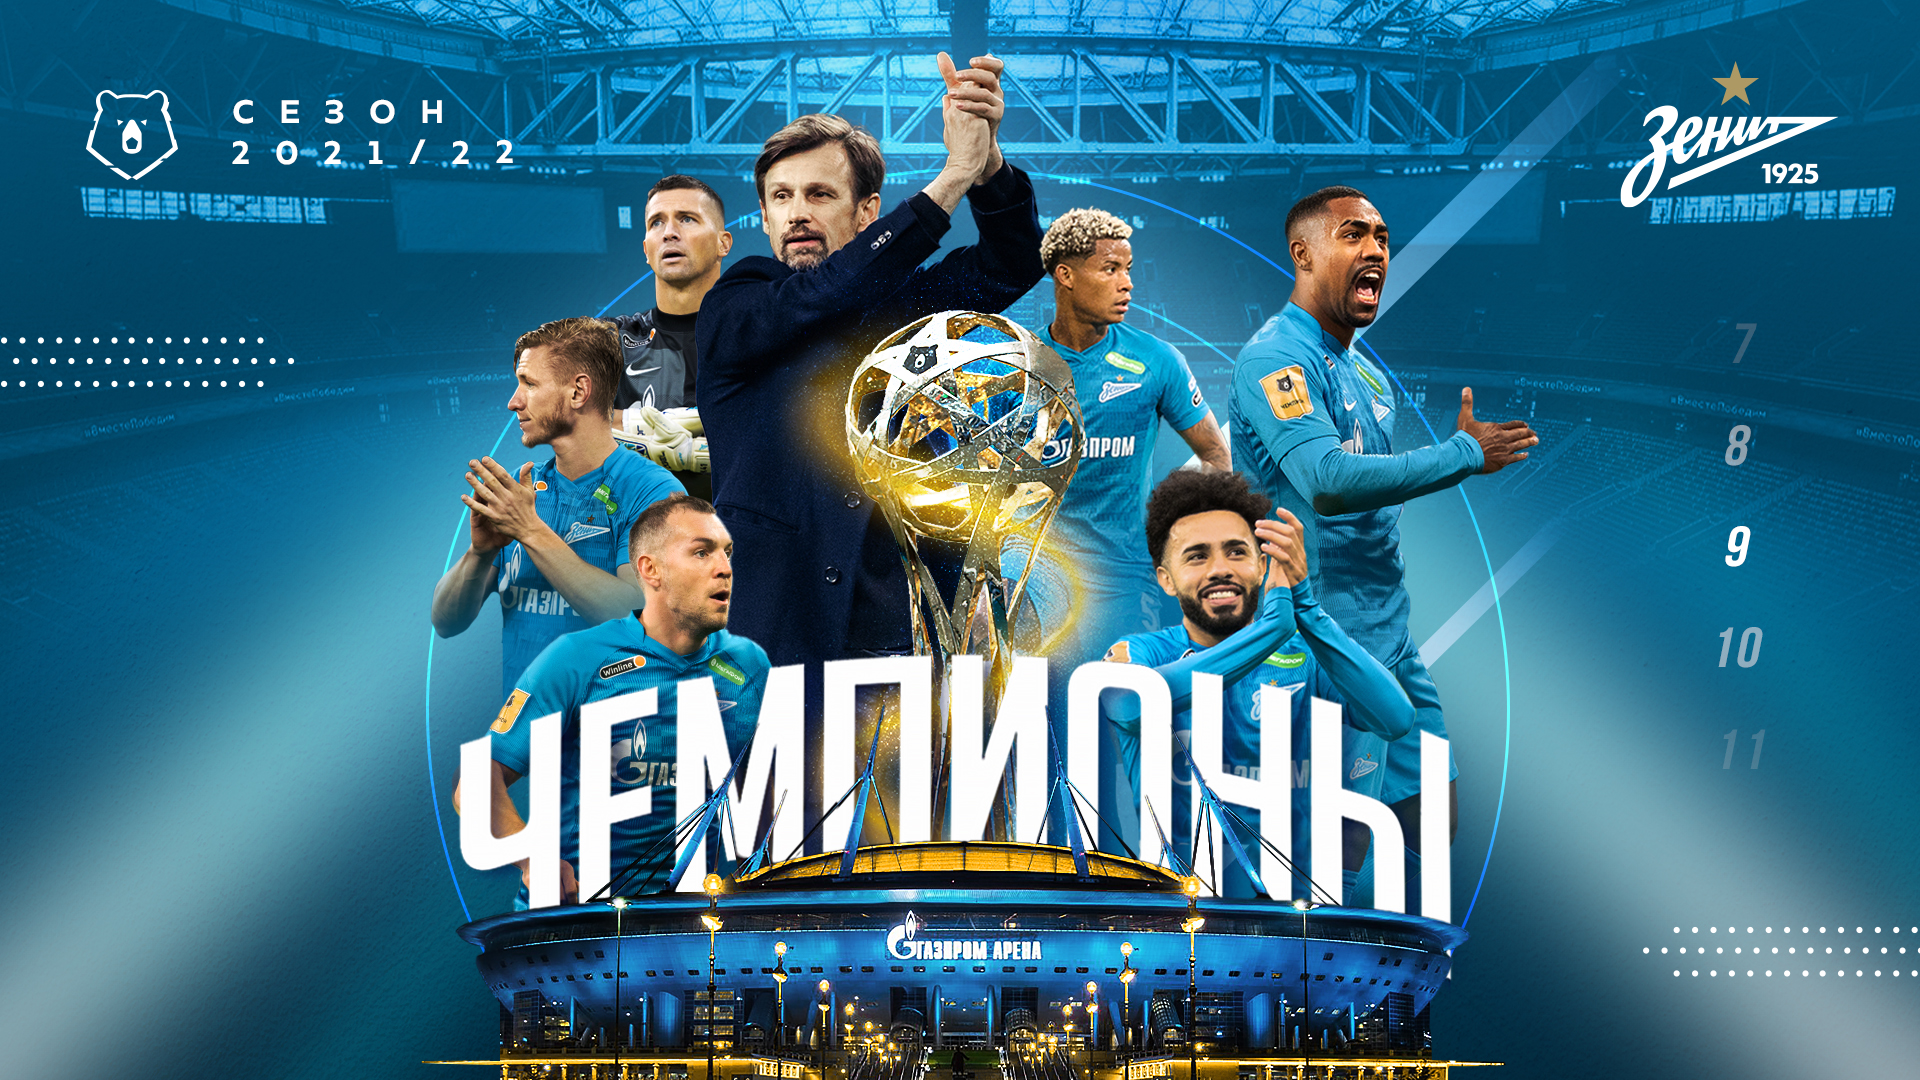 Zenit are eight-time RPL champions!